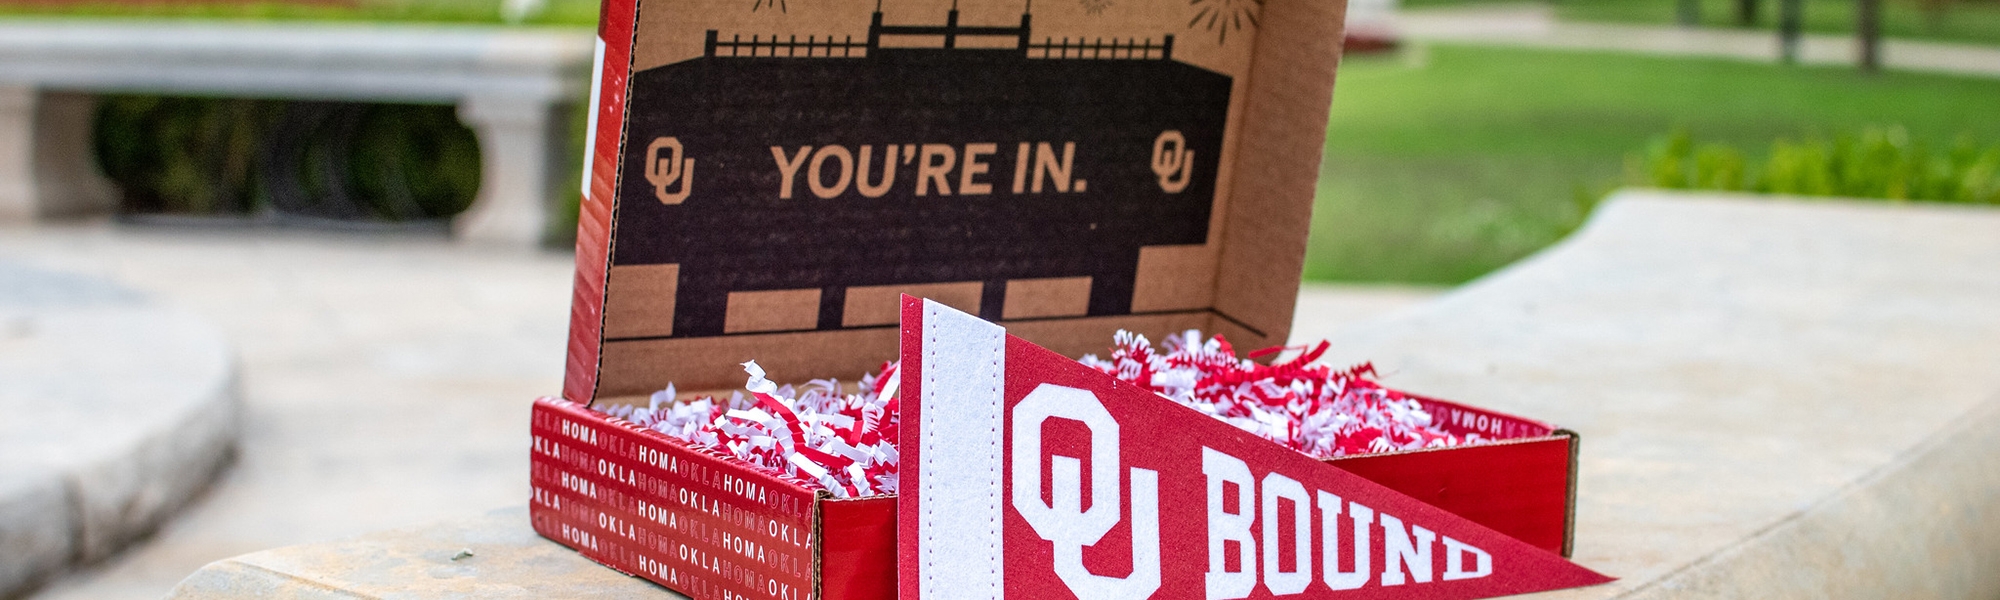 A welcome box for students admitted to OU: OU, You're In. OU, Oklahoma, OU Bound